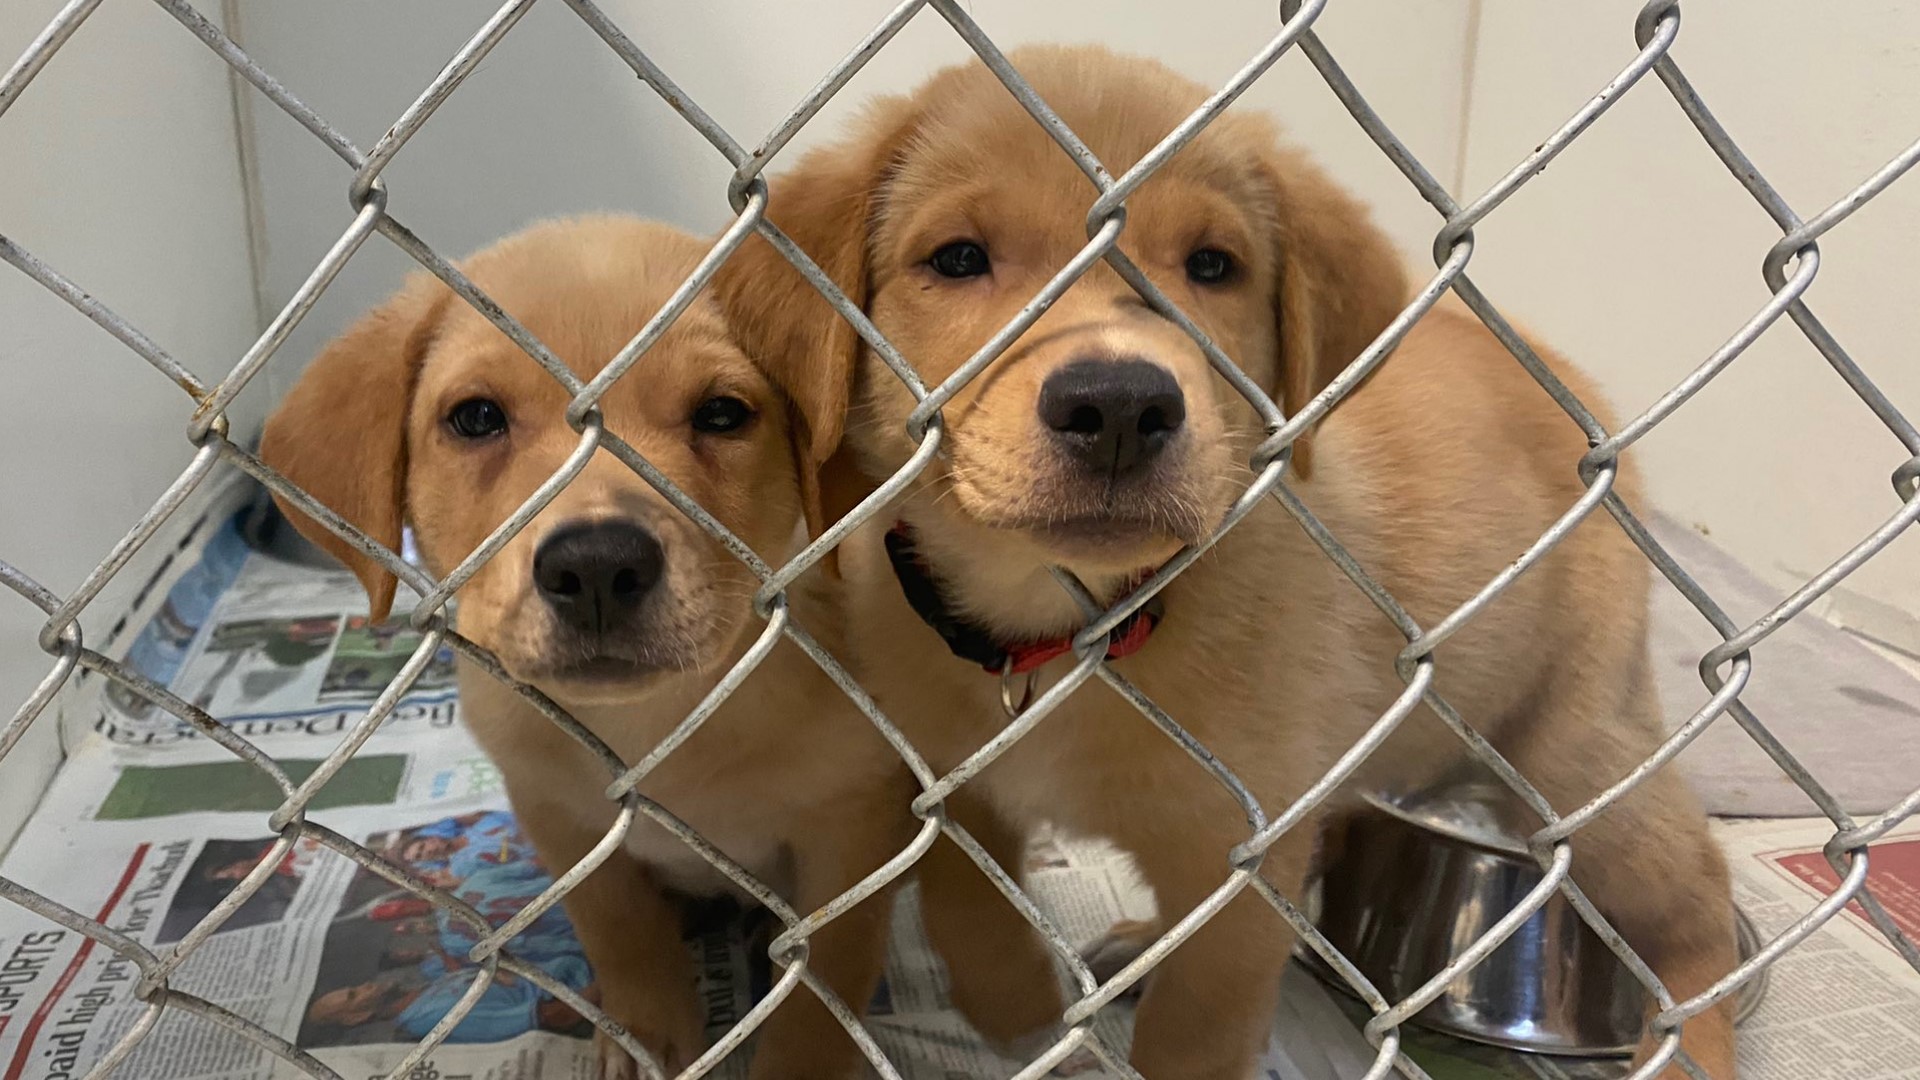 The Franklin County Humane Society has no more space for animals. It's a problem that's taking over shelters nationwide.